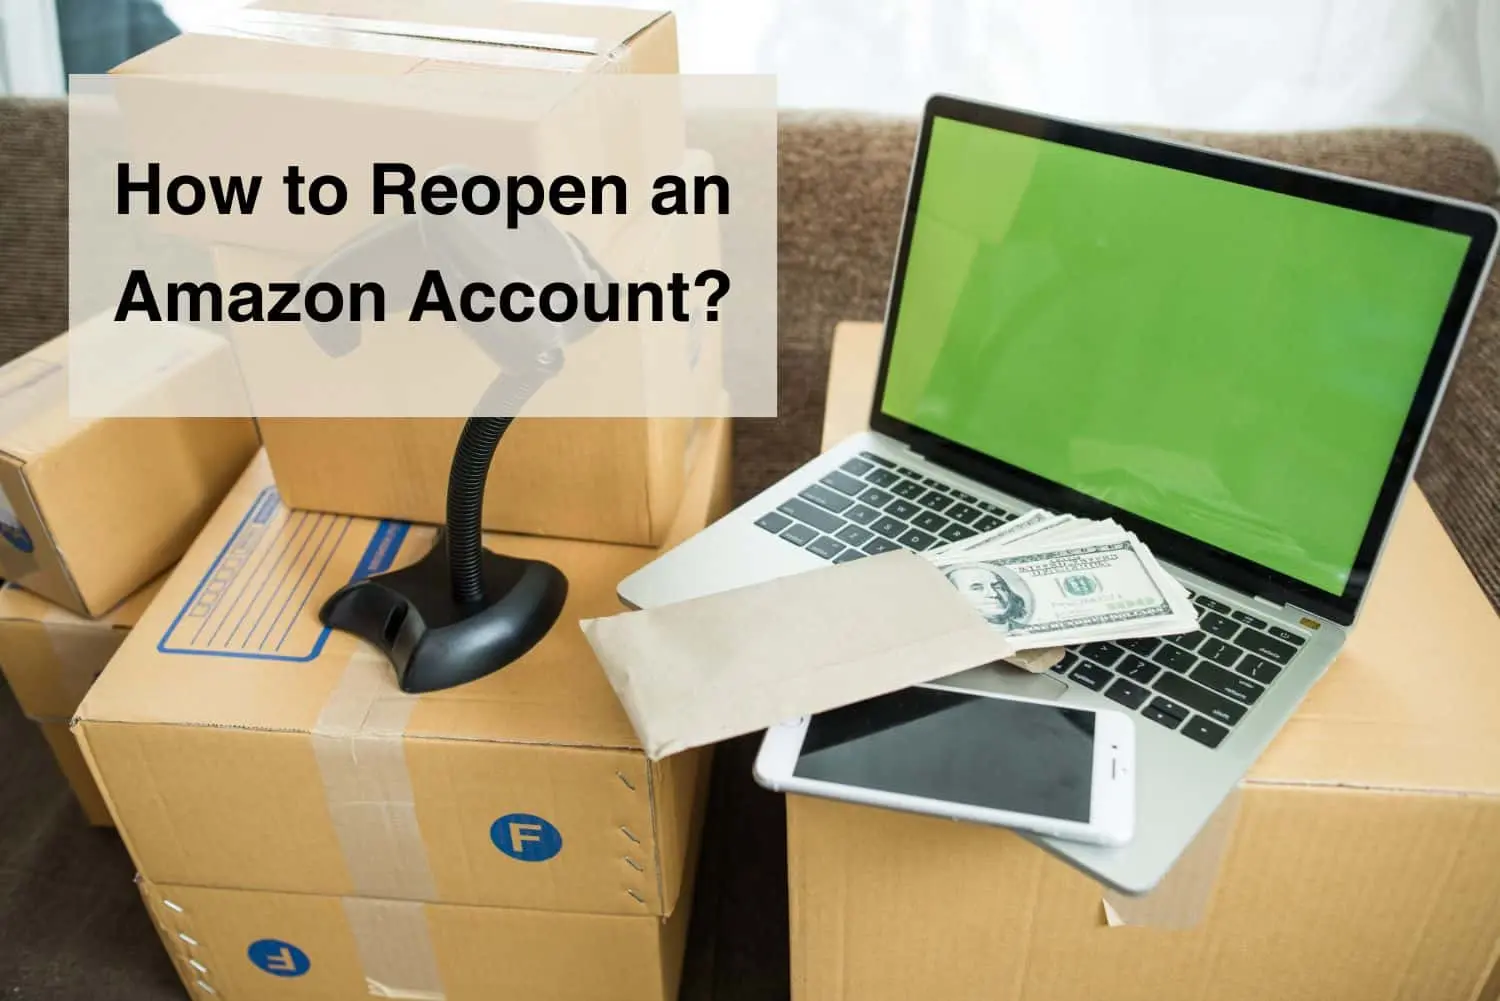 Reopen an Amazon Account